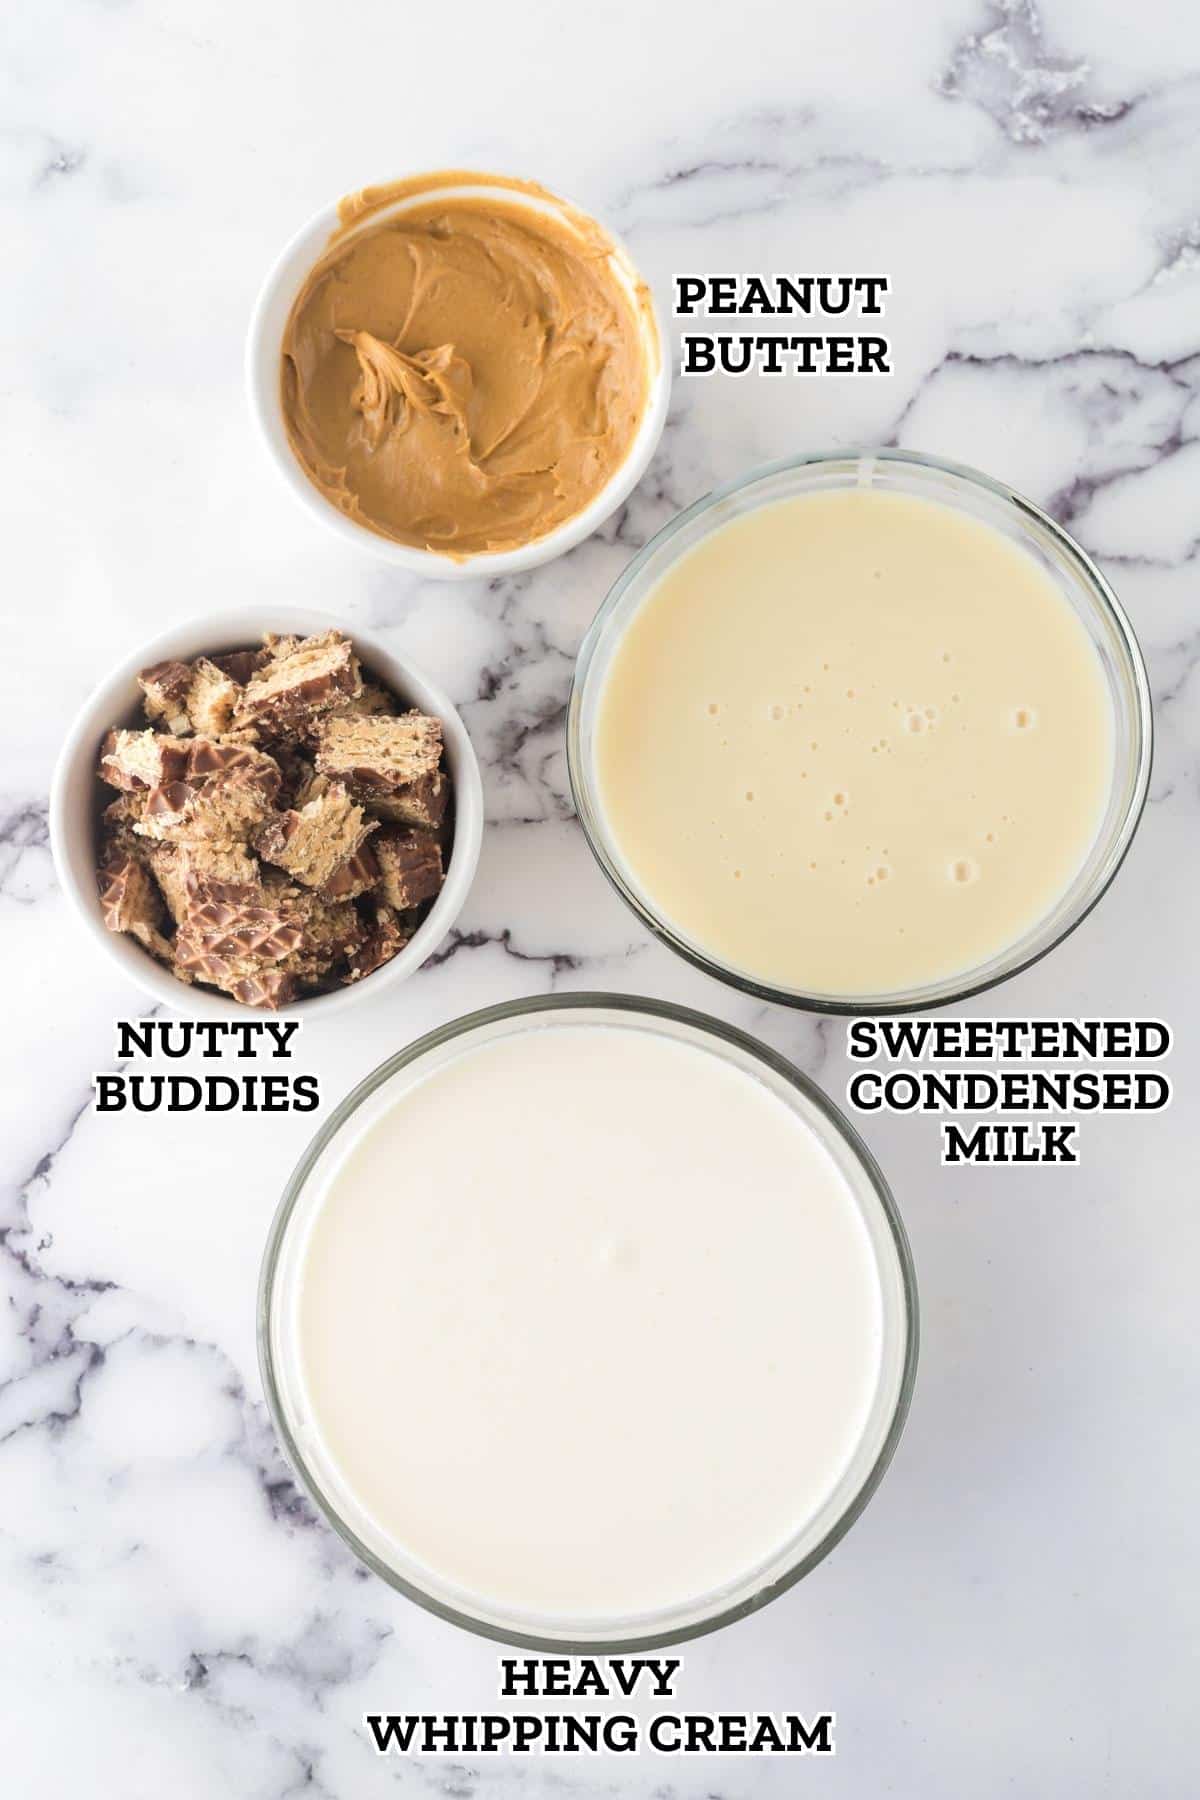 A labeled image of ingredients needed to make no-churn nutty buddy ice cream.